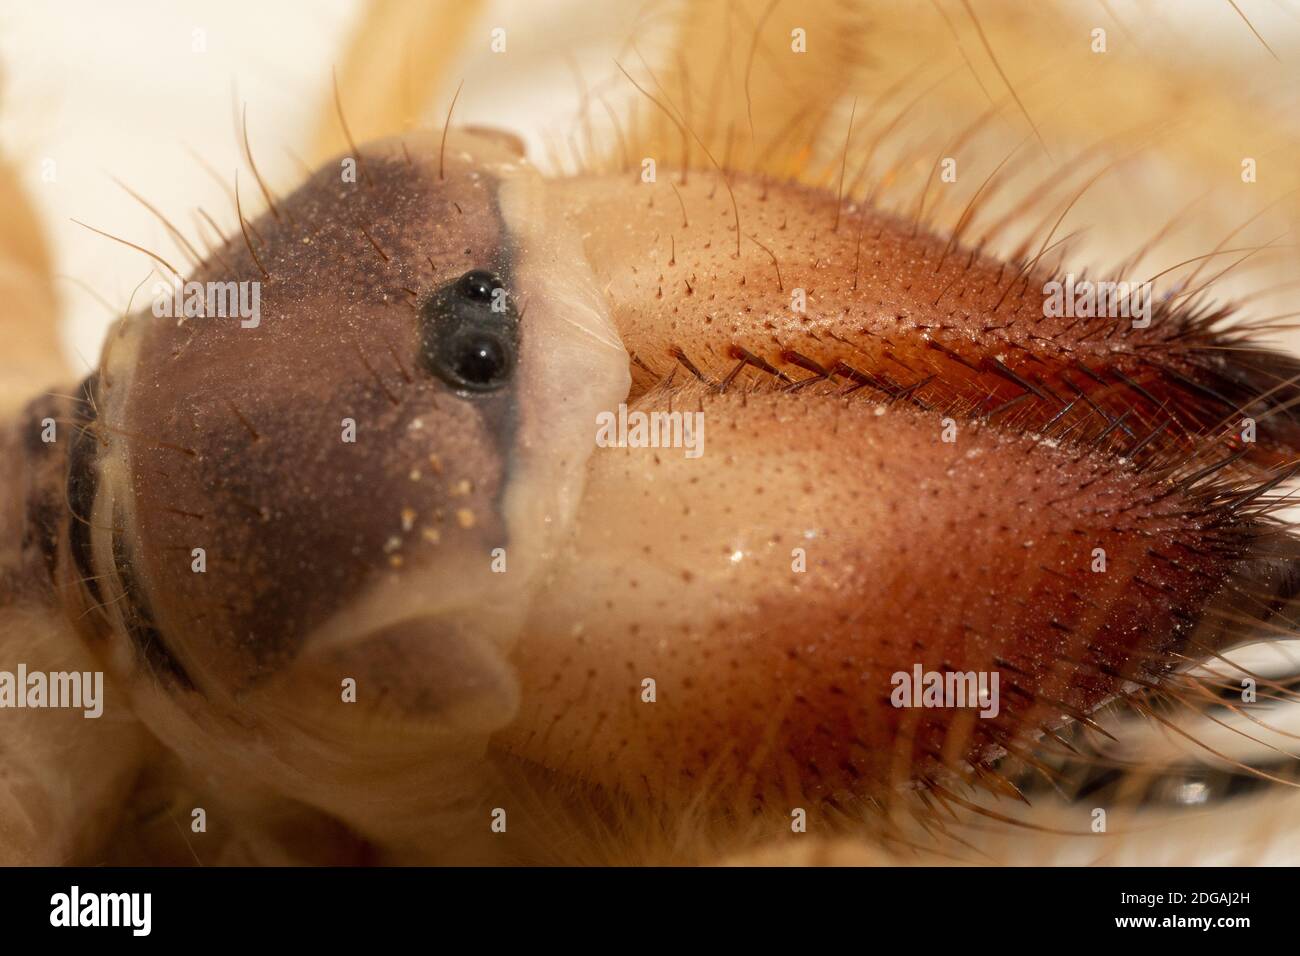 Egyptian giant solpugids (Galeodes Arabs), wind scorpion or camel spider macro shot head and eyes close up in the united arab emirates in the middle e Stock Photo